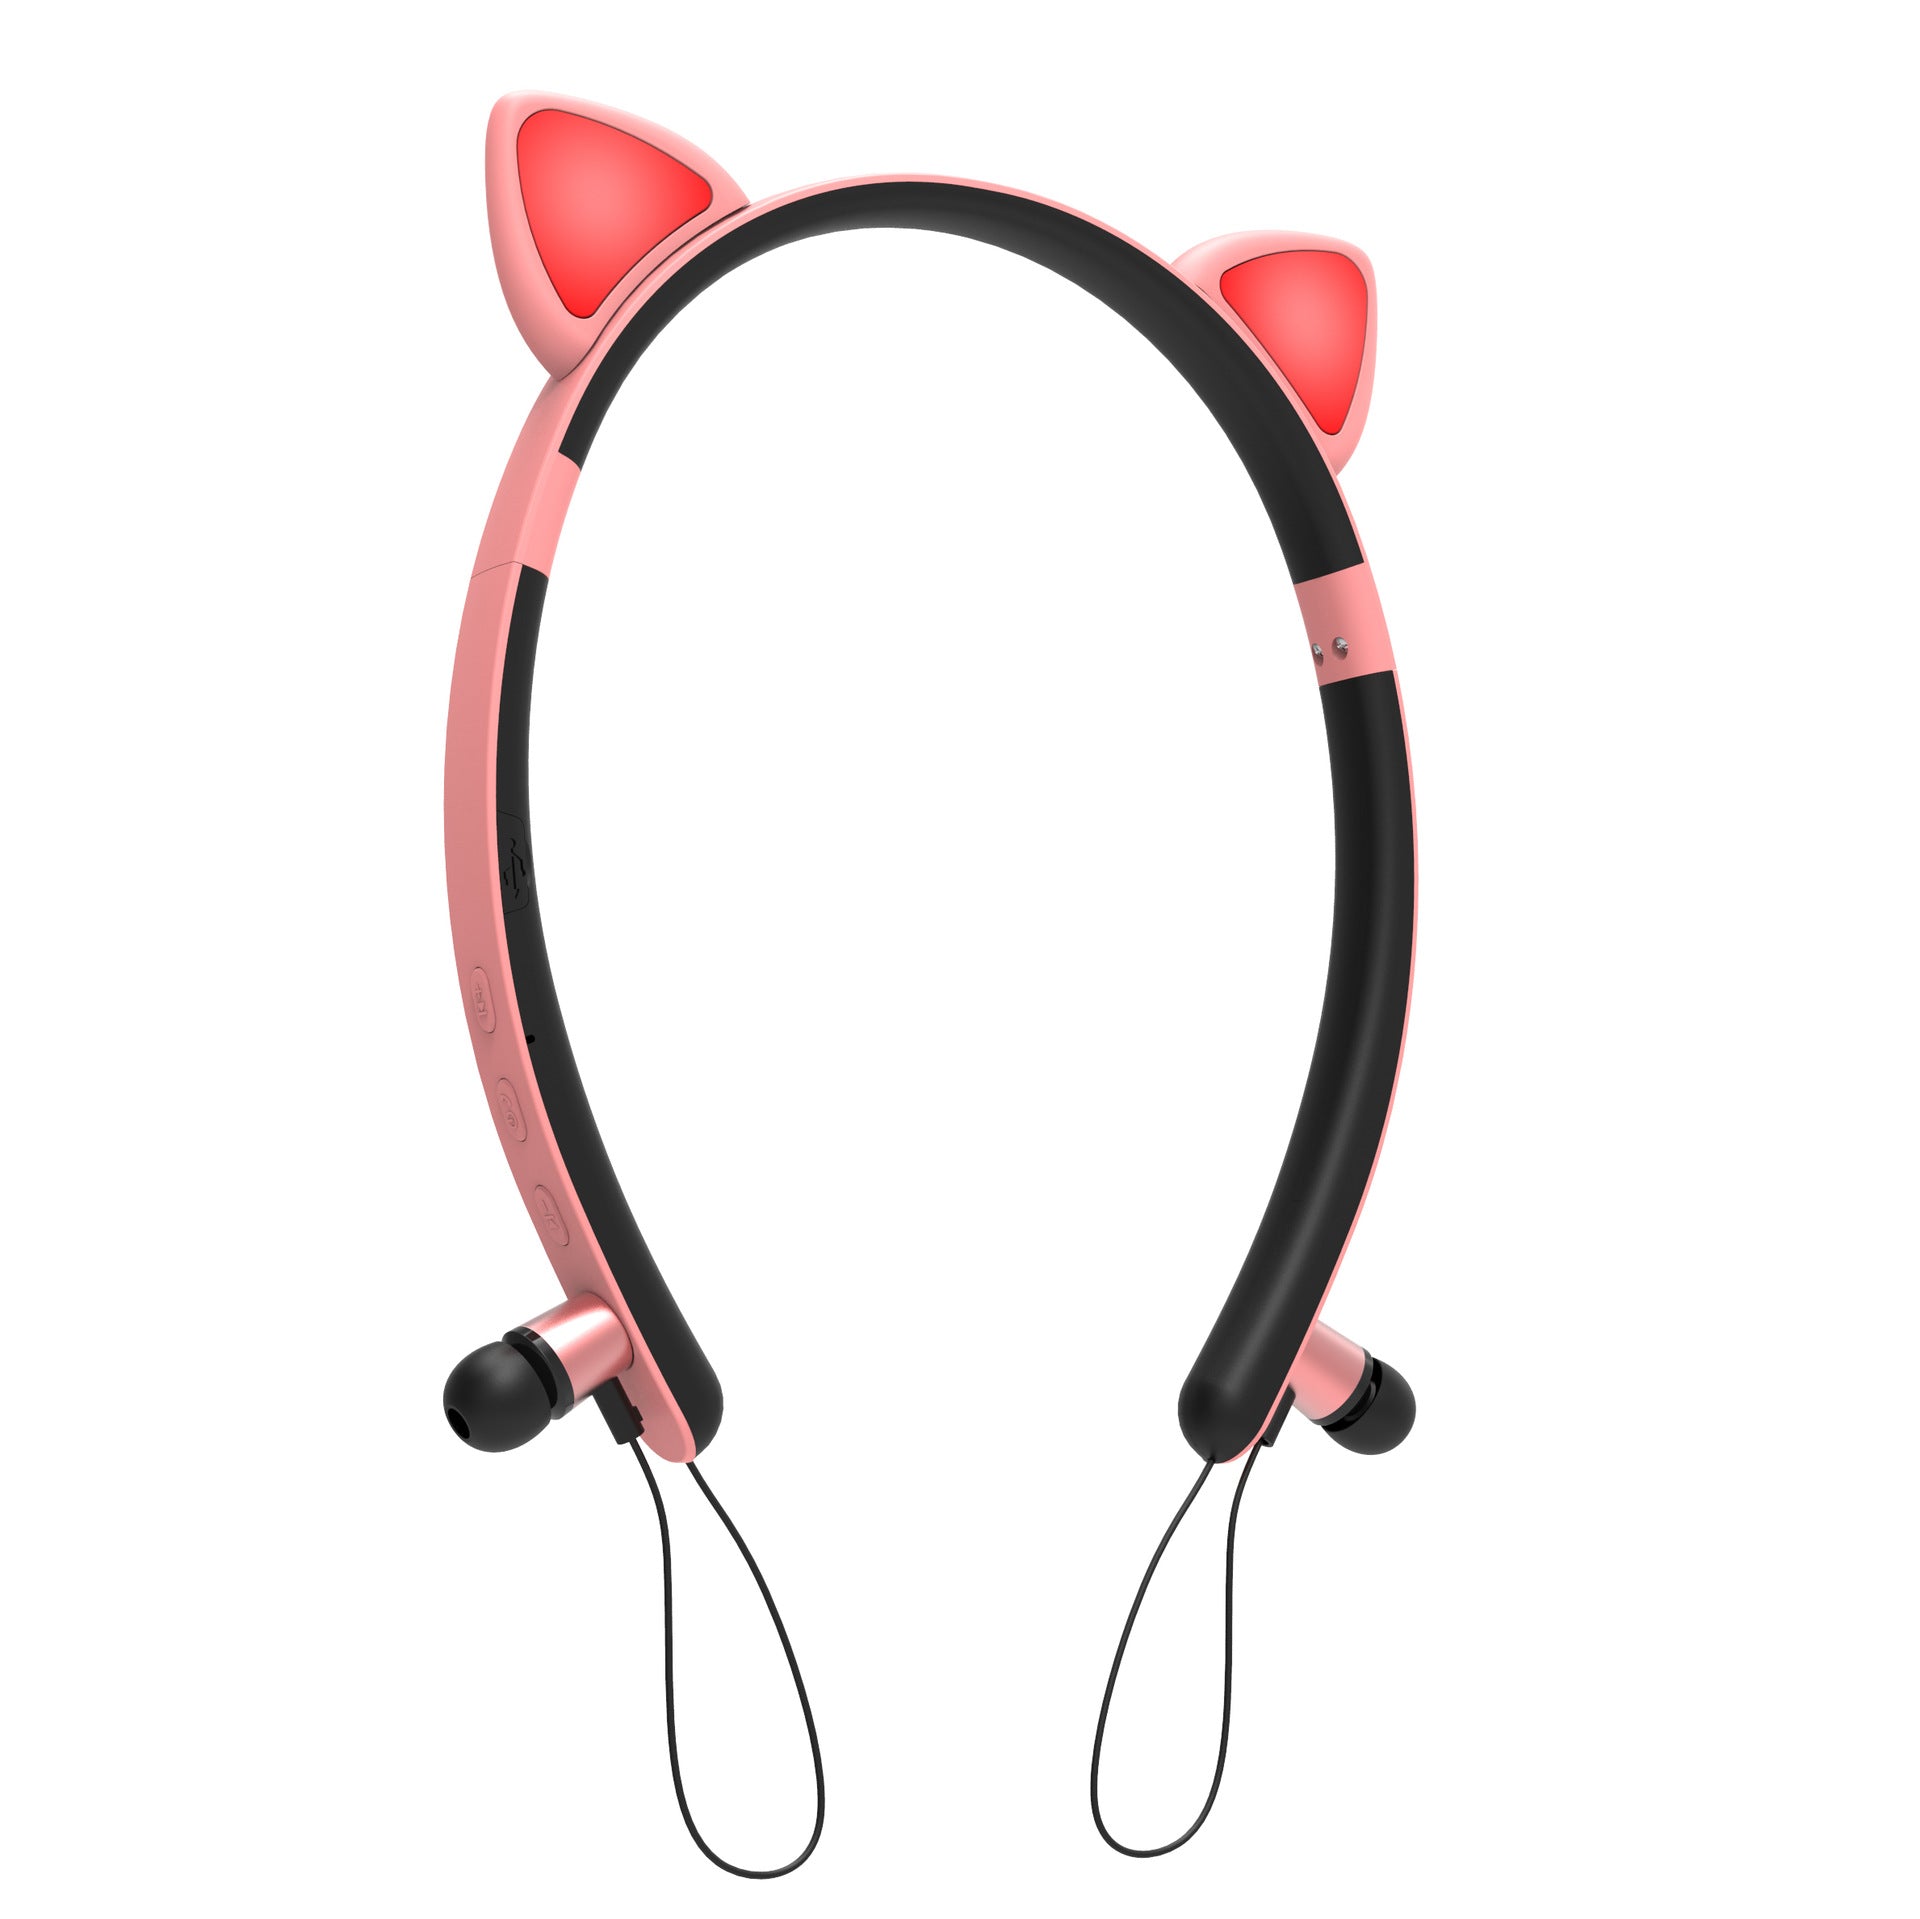 LED Glowing True Wireless Bluetooth Headphones Auriculares Cartoon Girl Headband Cat Ear Headset With Microphone For All Phones